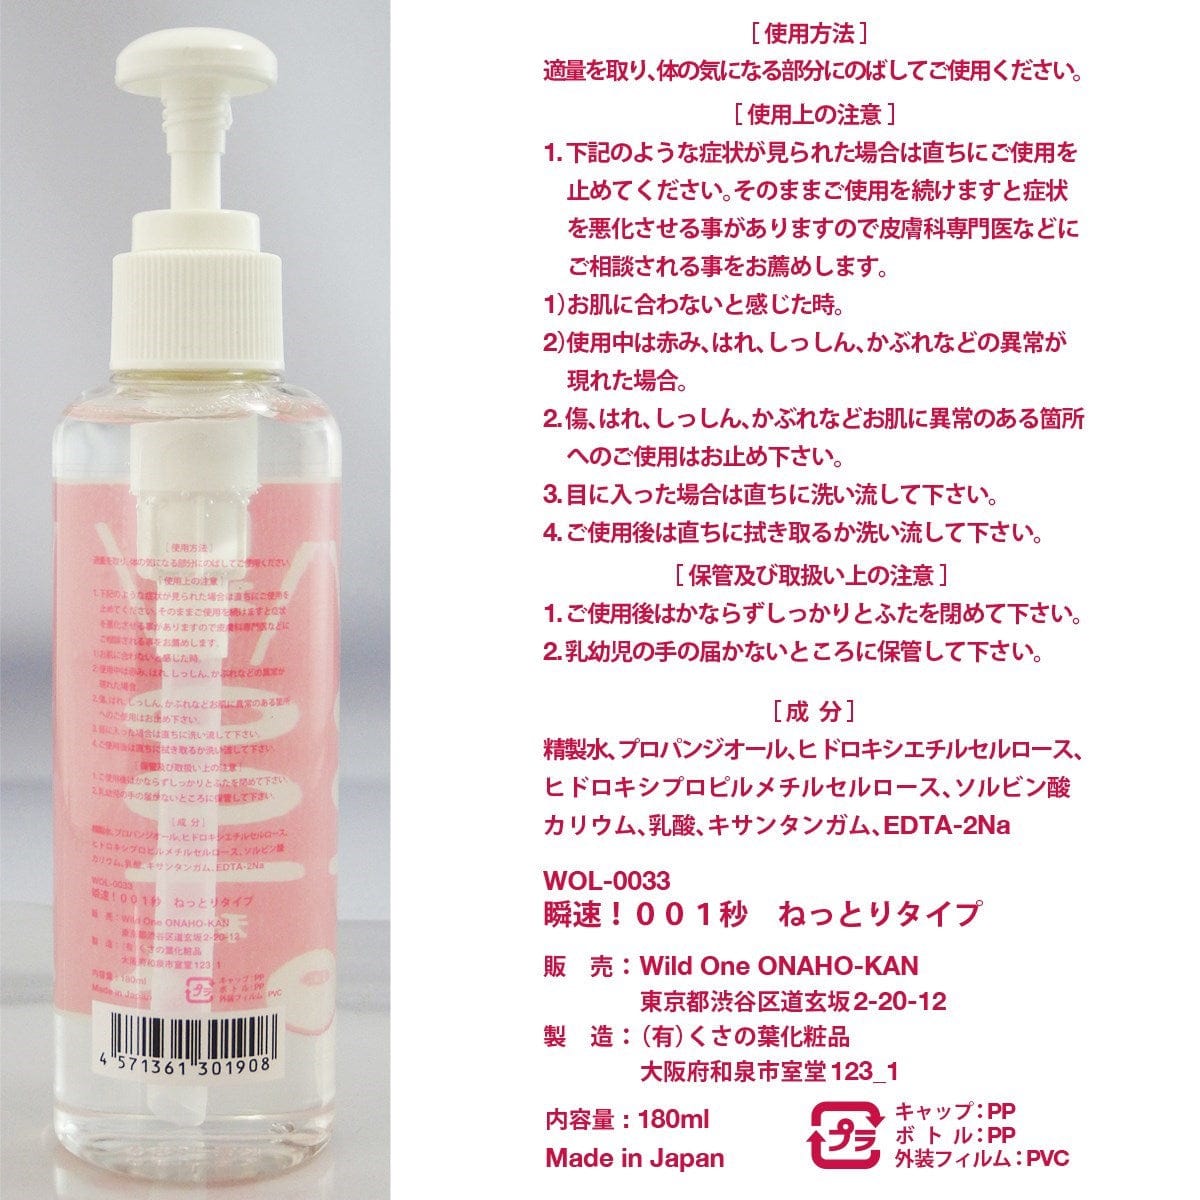 SSI Japan - Wash Free Lotion Instant Speed 001 Second Lubricant Sticky Type 180ml Lube (Water Based) 621238002 CherryAffairs